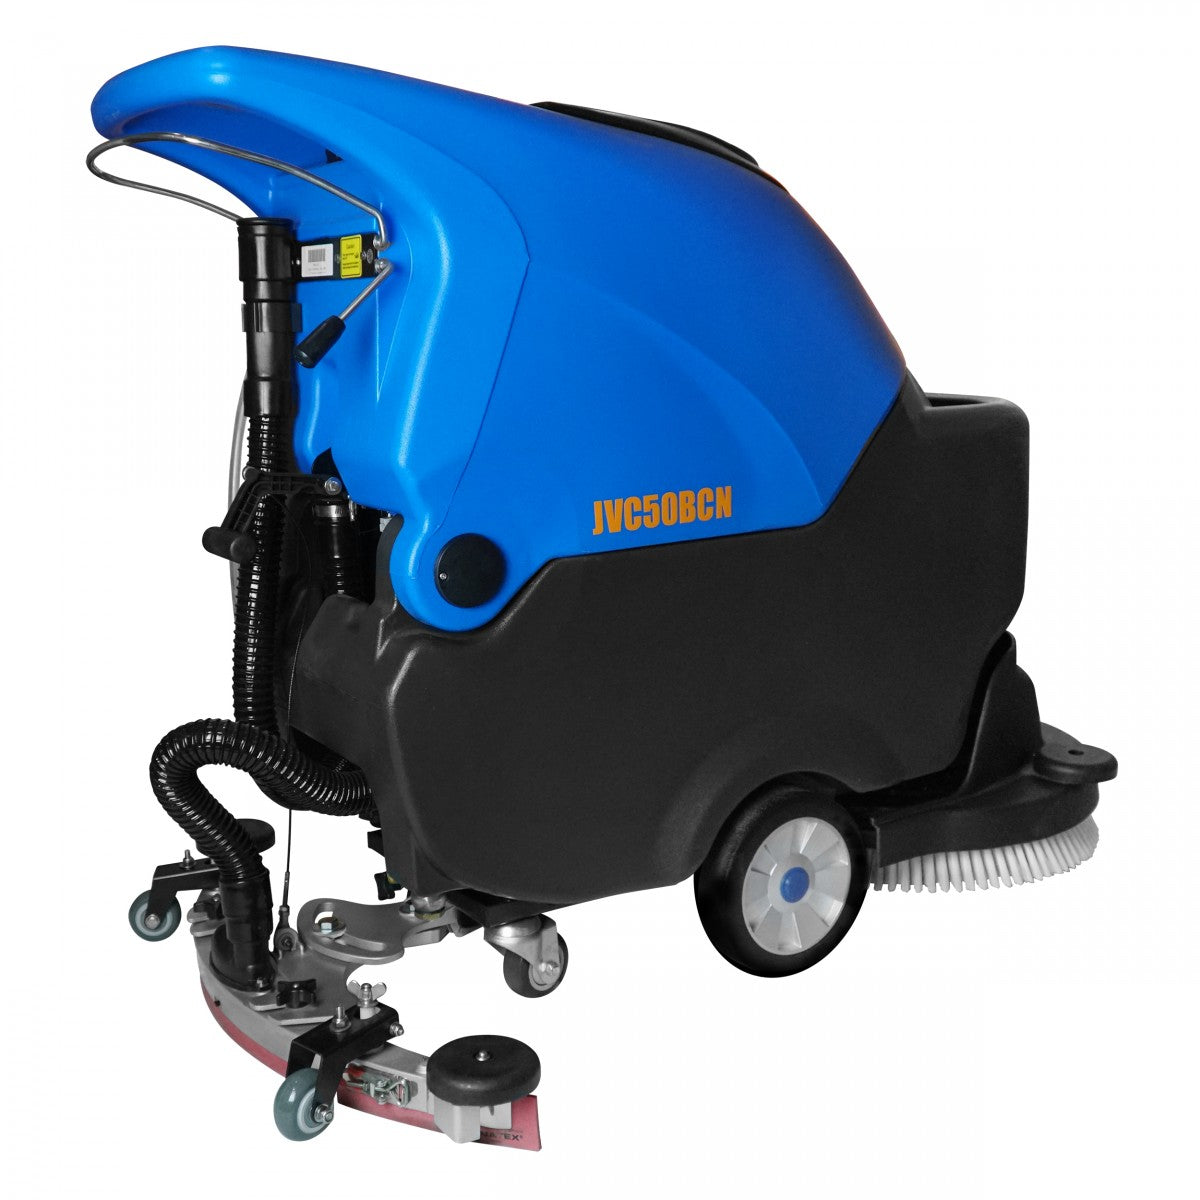 Johnny Vac JVC50BCN Autoscrubber | 20" Cleaning Path | Gel Batteries & Charger Included